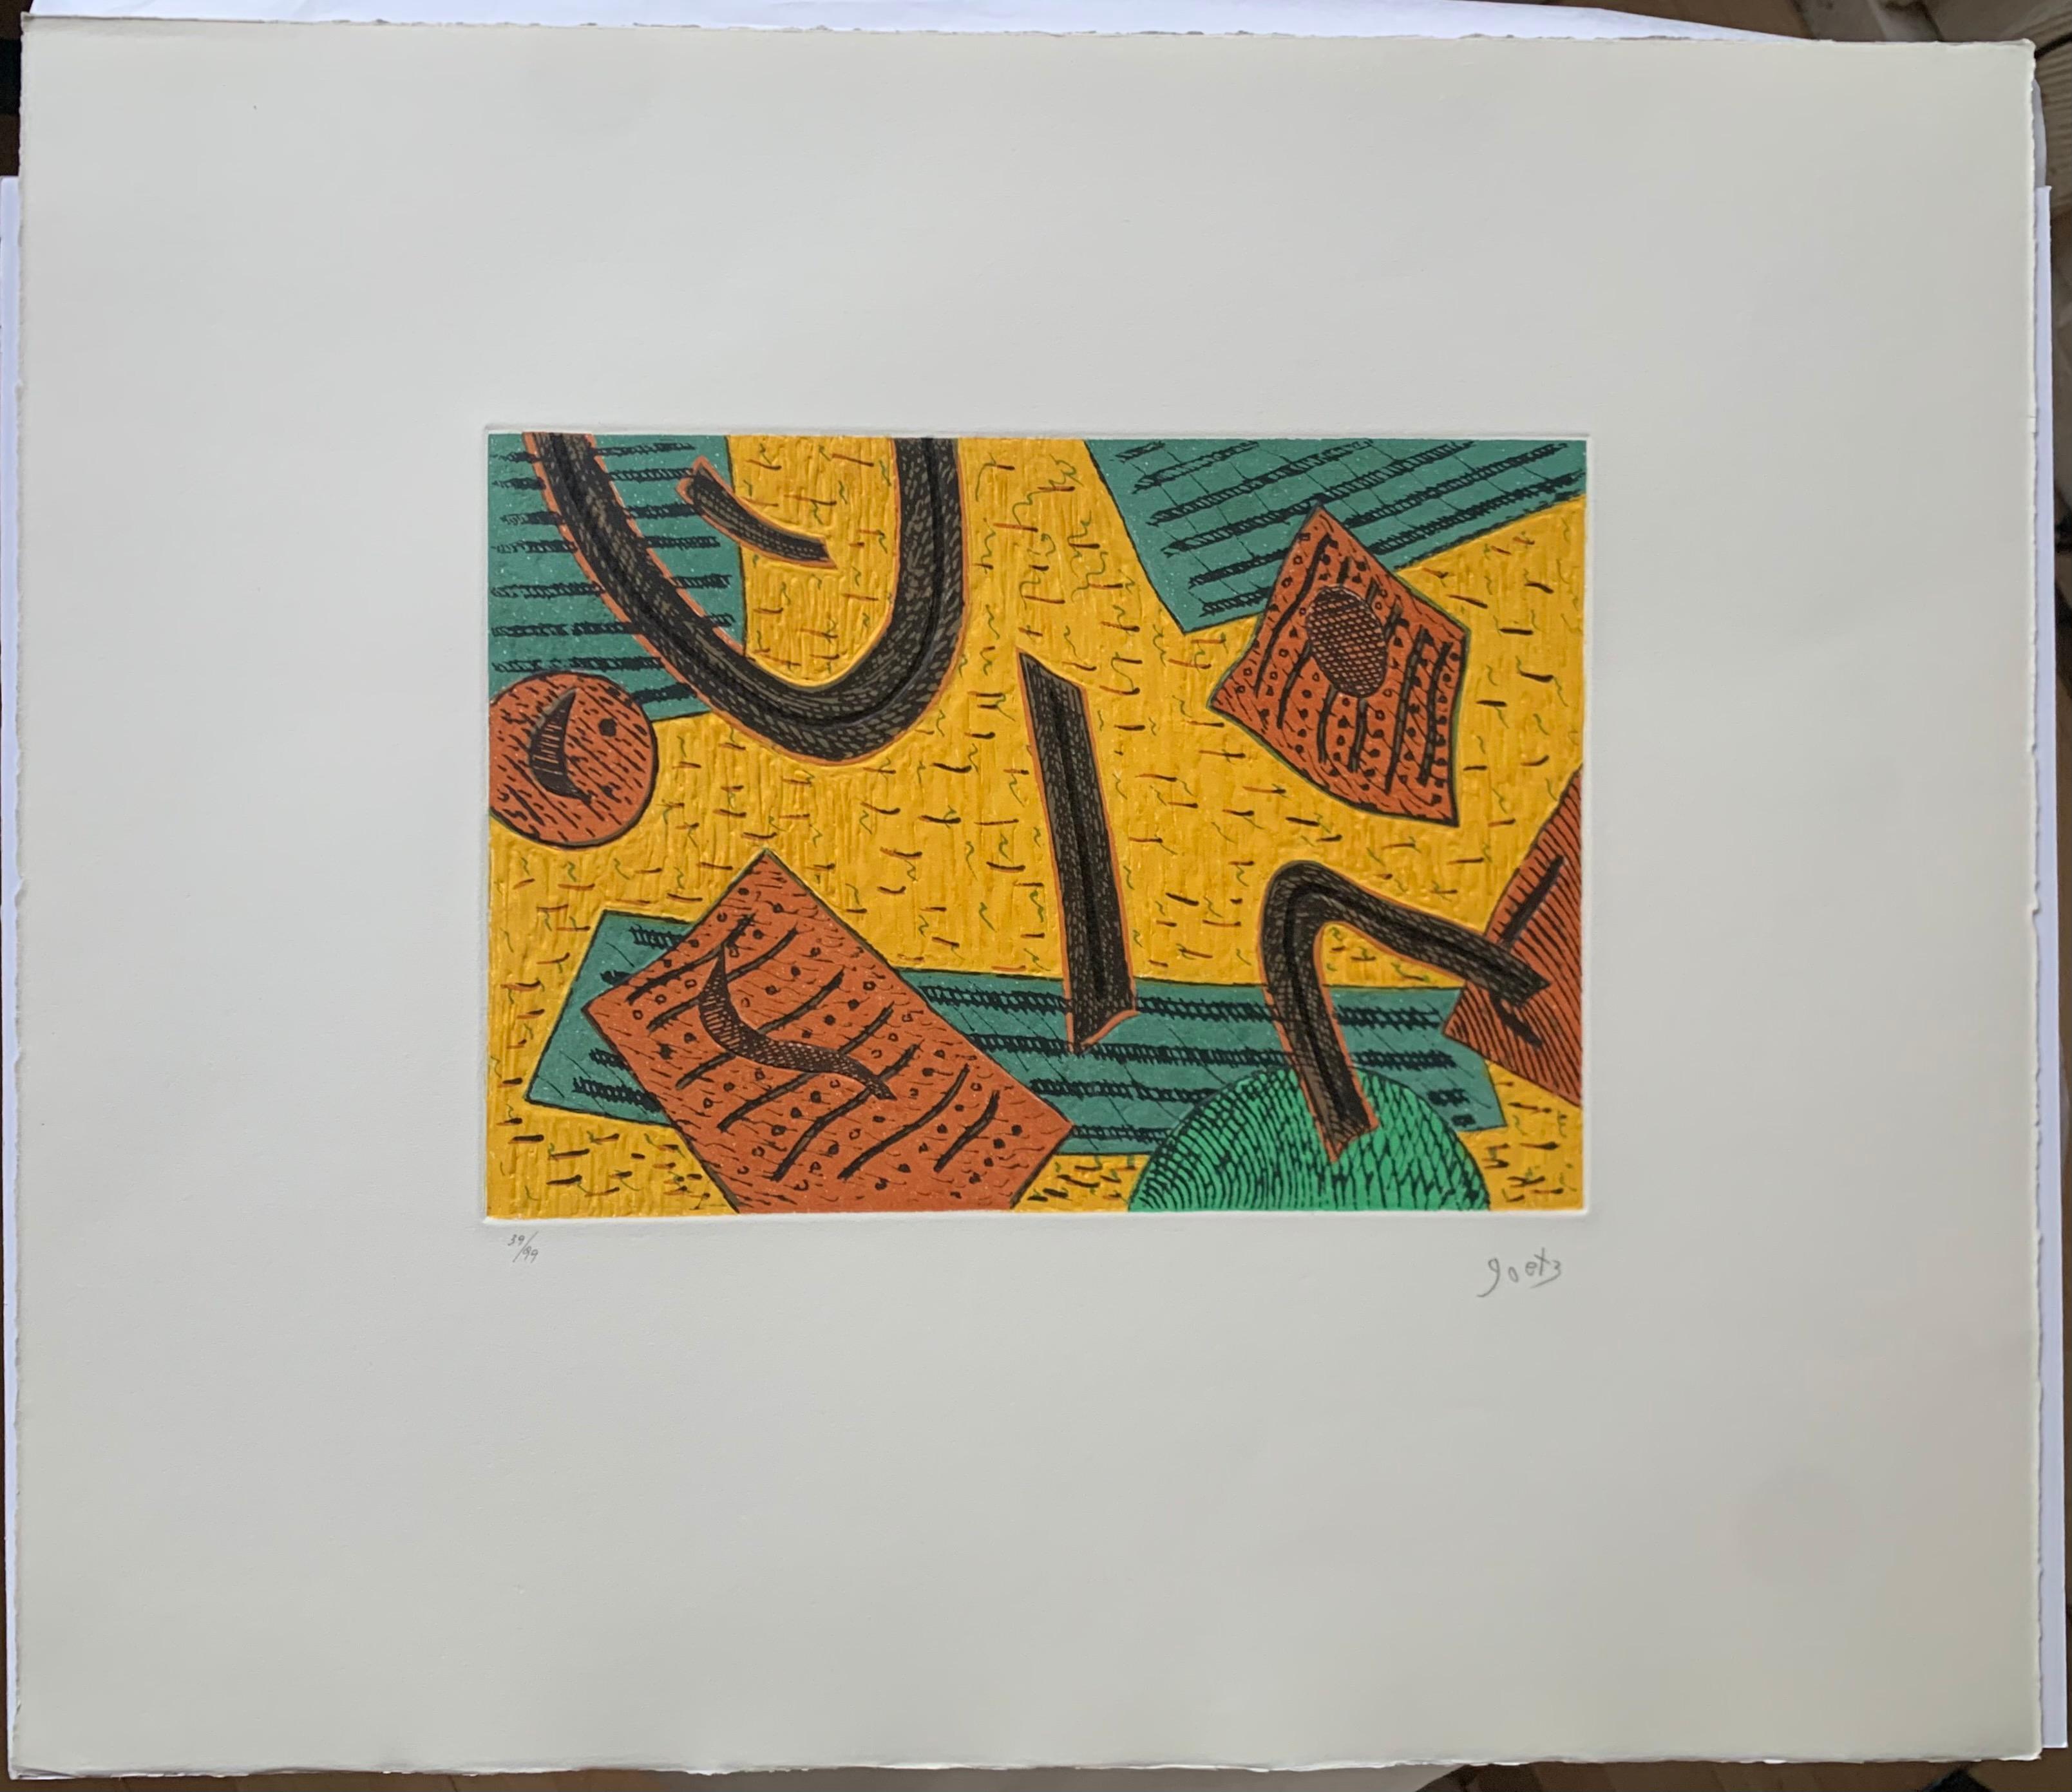 Circa 1970
Original carborundum engraving
Numbered 39/99
Signed lower right 
Paper dimensions : W64 x H55
Engraving size : H24 x W35 
150€